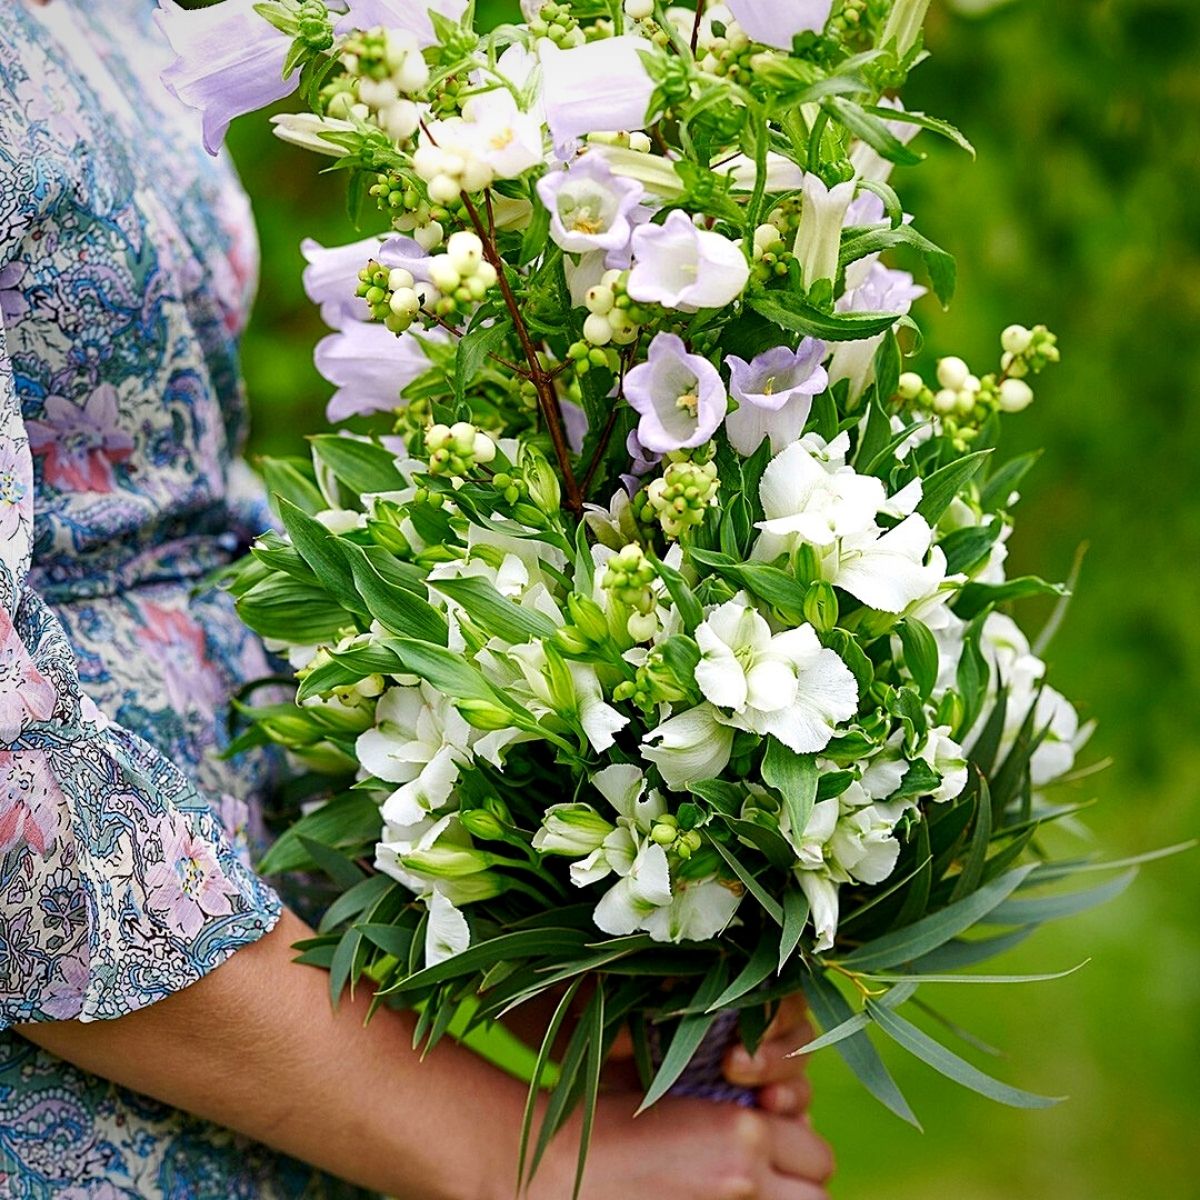 Experience the Feel of Wildflowers With Royal Van Zanten's Charmelia